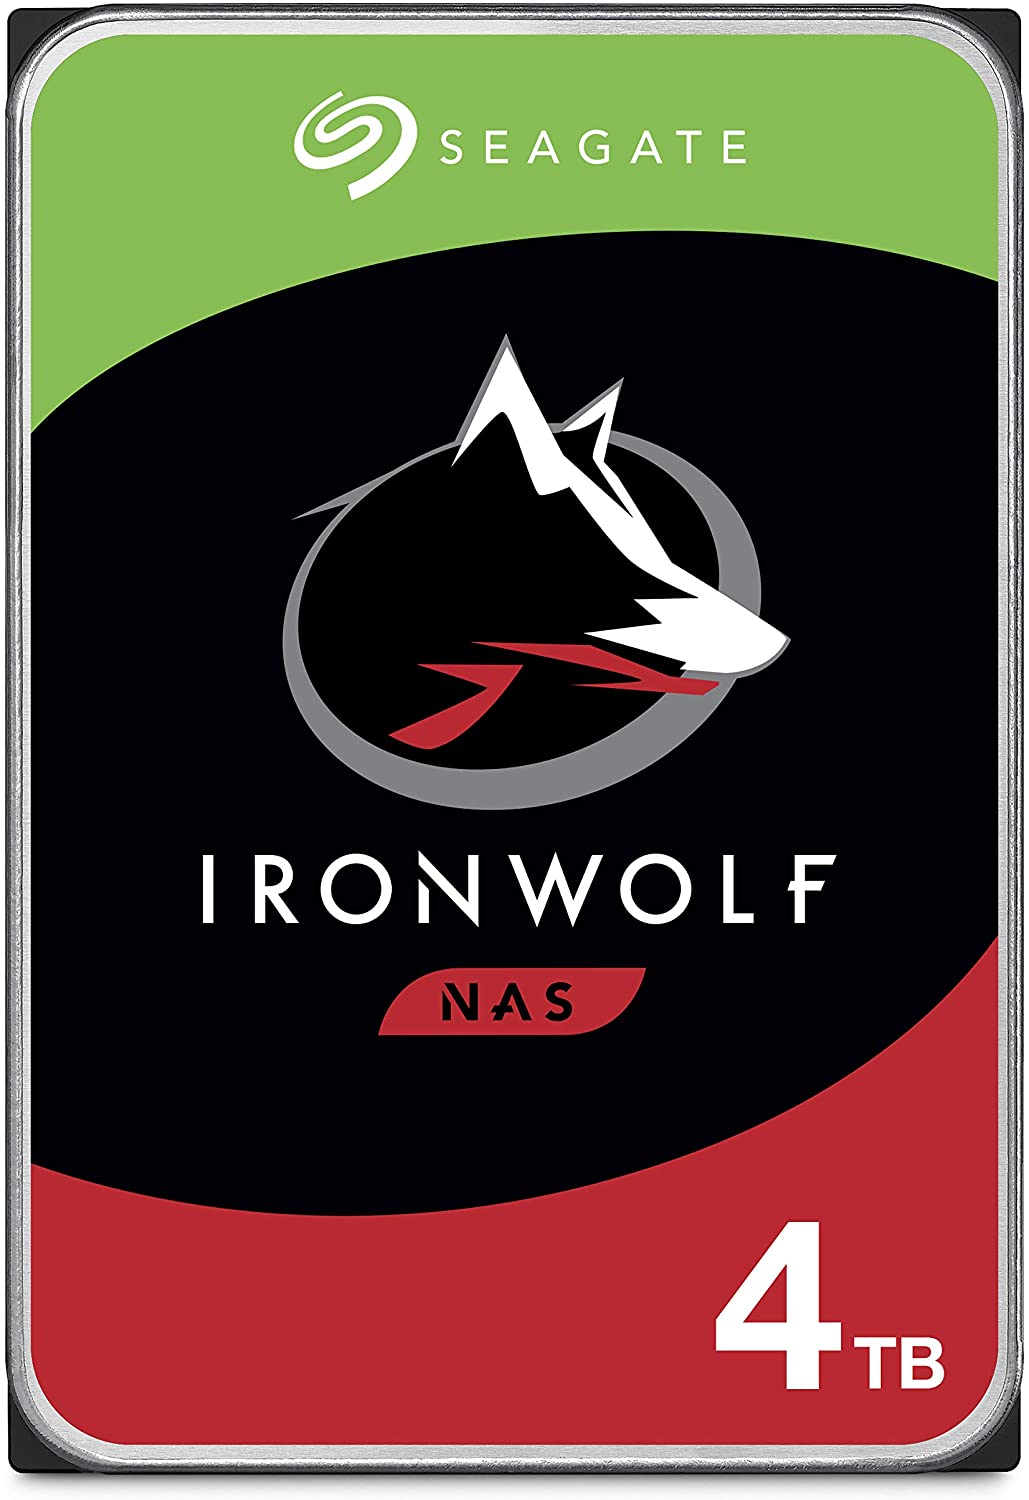 Seagate IronWolf 4TB NAS Internal Hard Drive HDD – CMR 3.5 Inch SATA 6Gb/s 5900 RPM 64MB Cache for RAID Network Attached Storage – Frustration Free Packaging